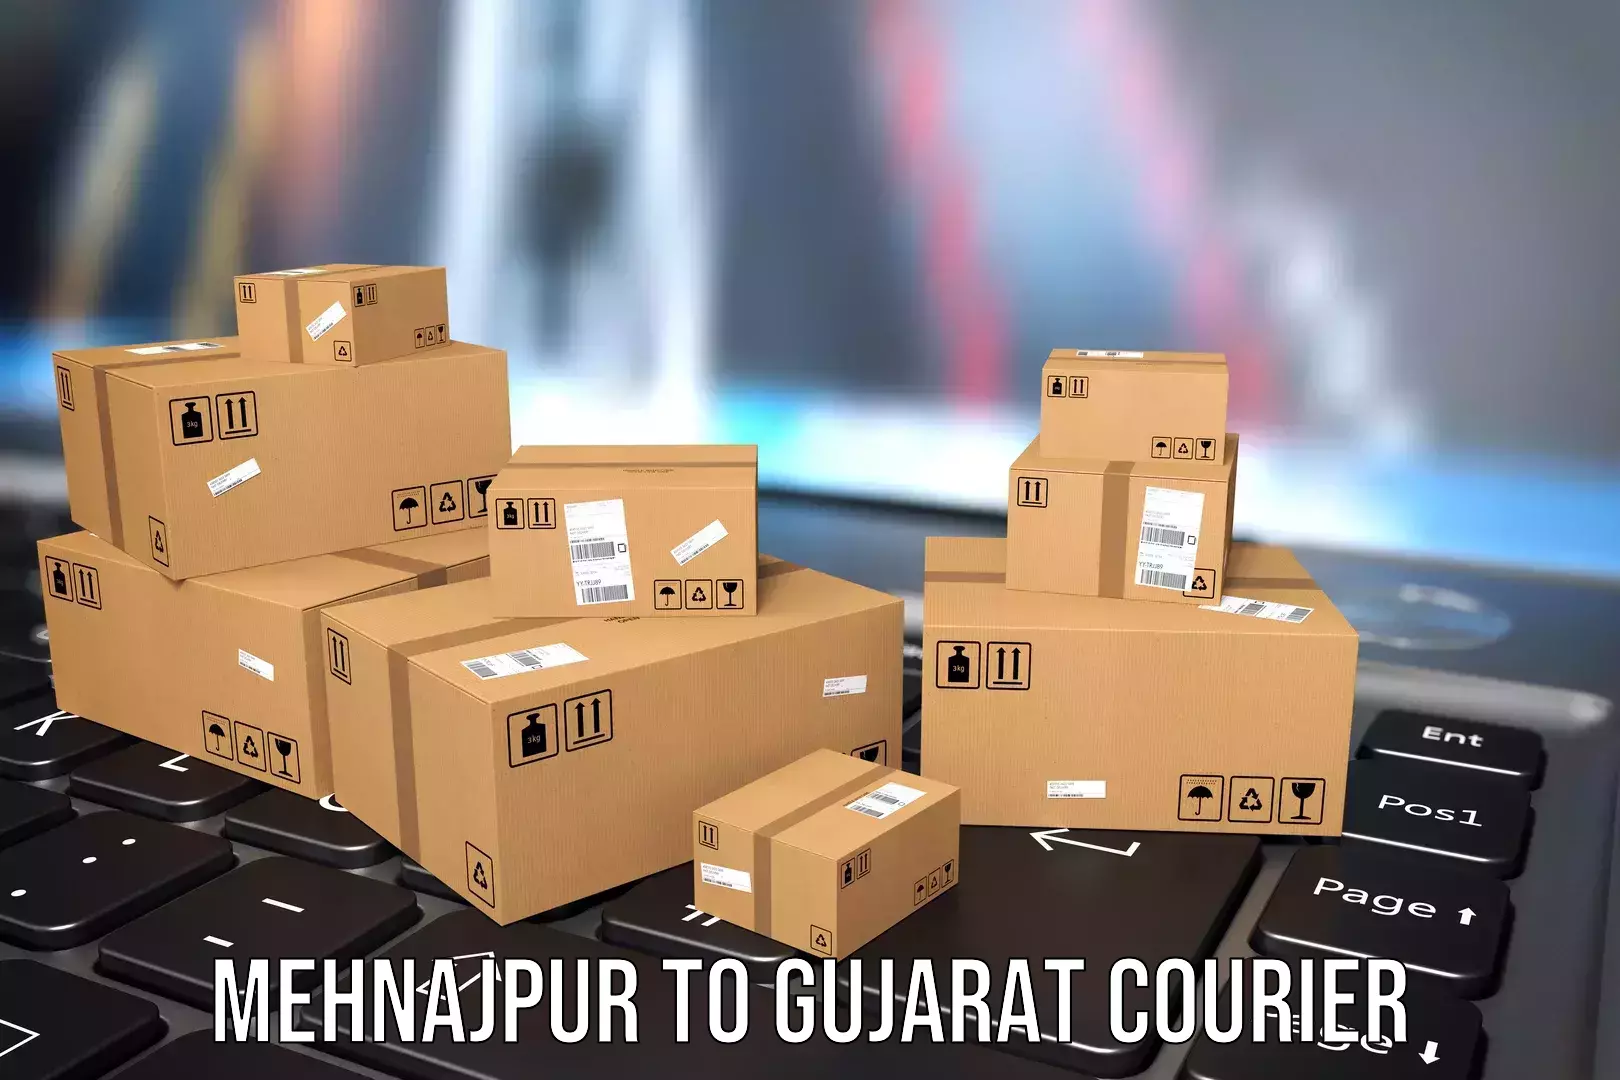 Luggage transport consulting Mehnajpur to Ankleshwar